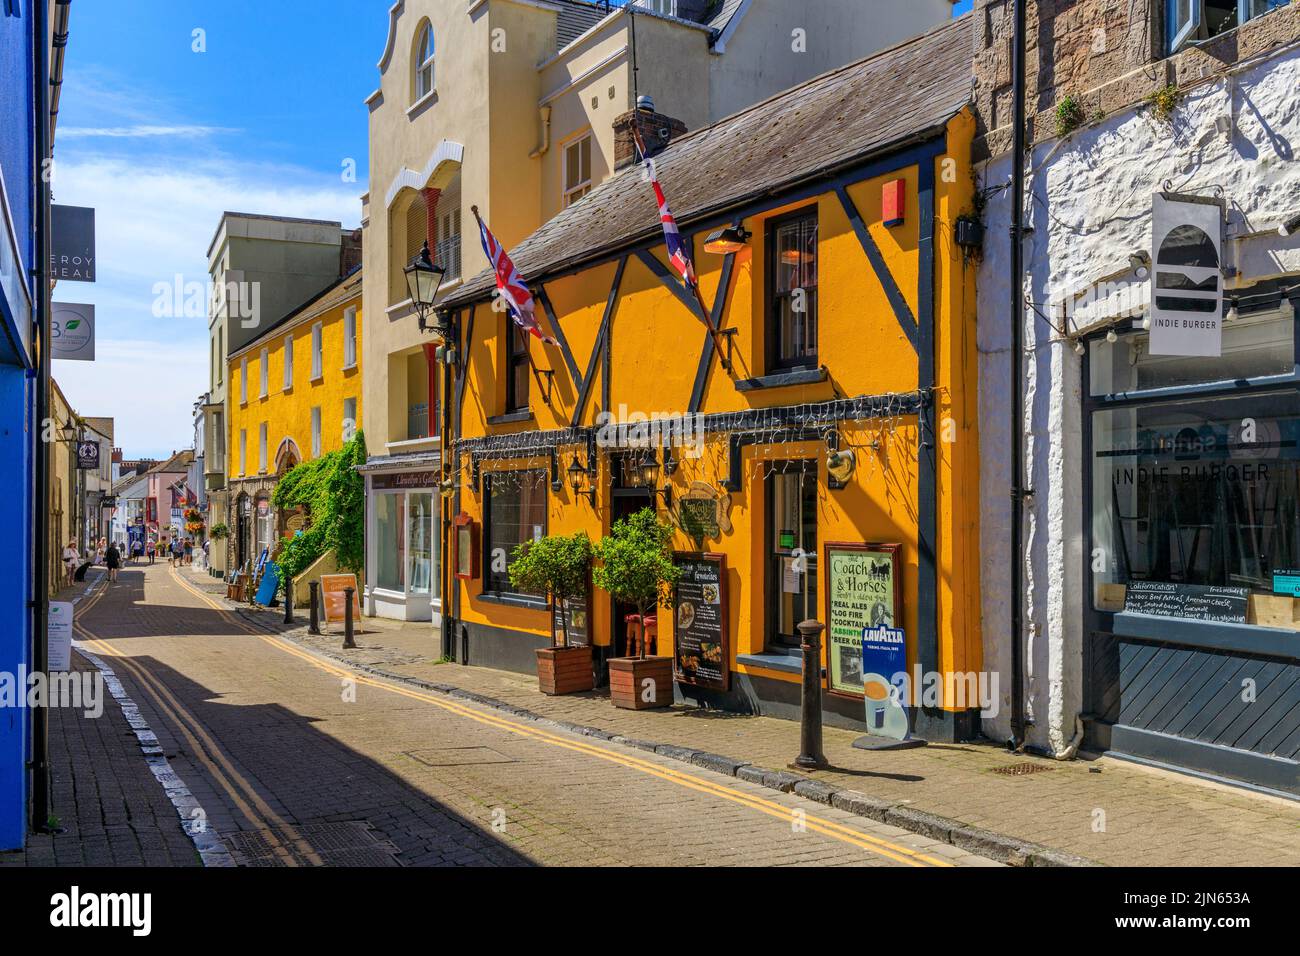 Colourful shops and pubs in Upper Frog Street, Tenby, Pembrokeshire, Wales, UK Stock Photo